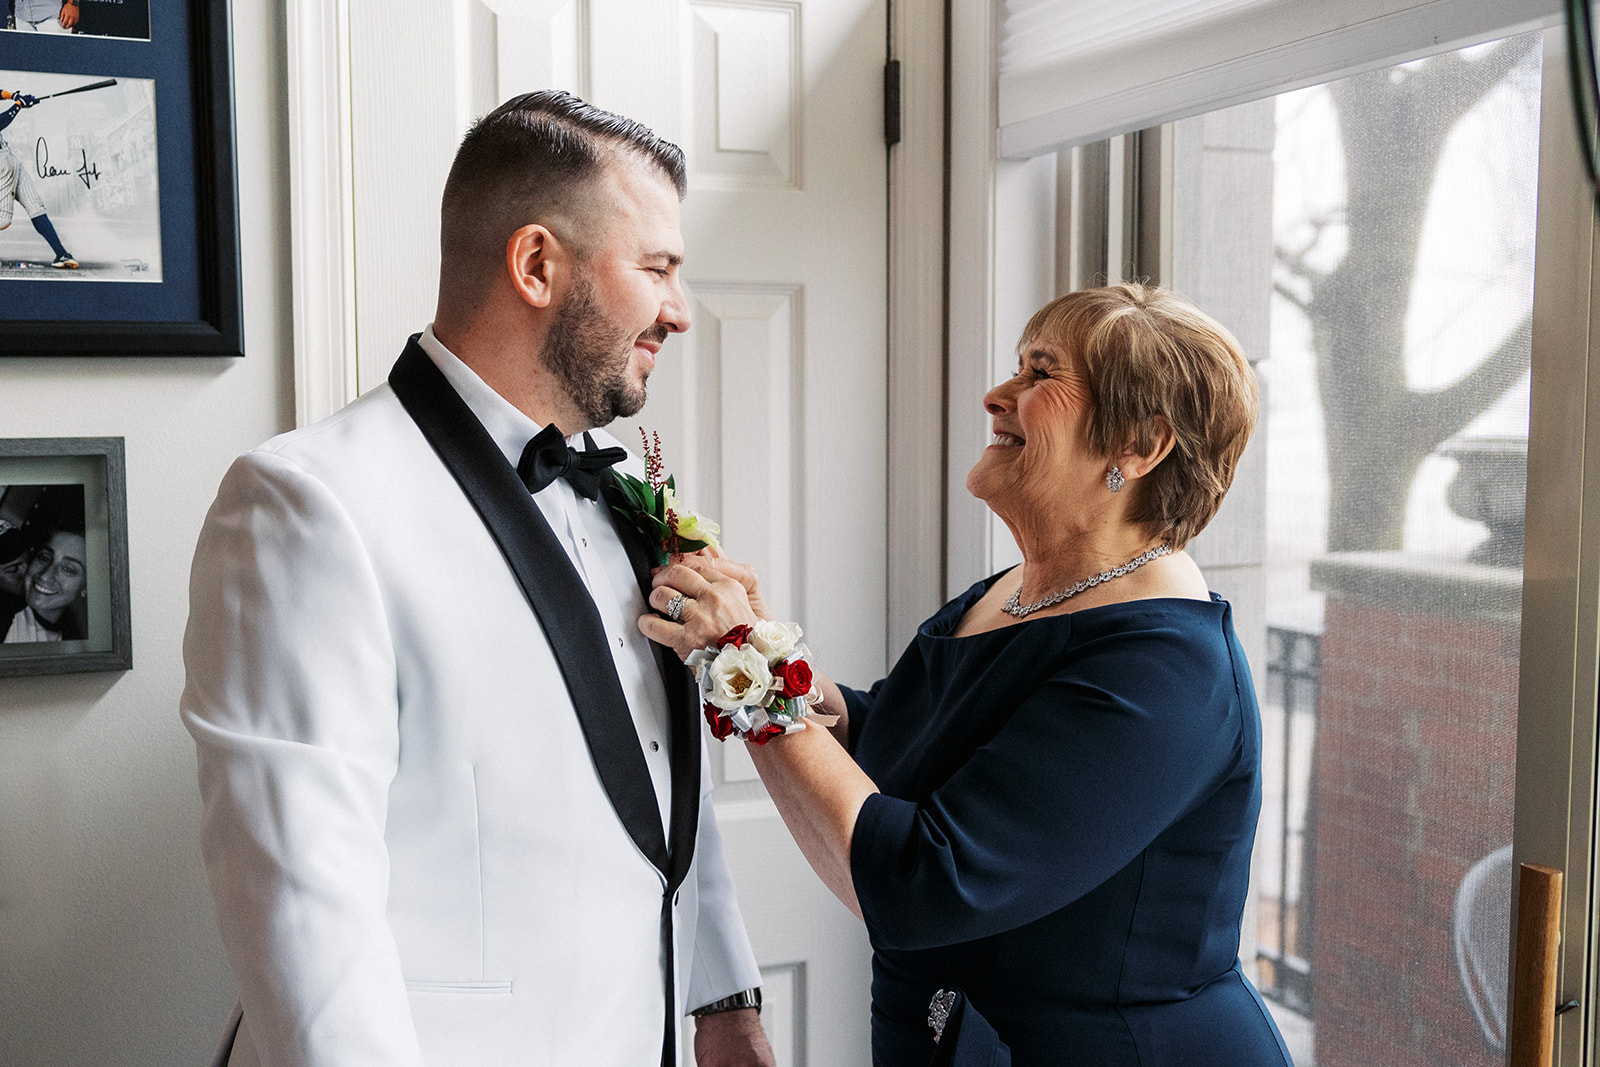 A happy mother pins the boutonniere on her sons wedding tuxedo